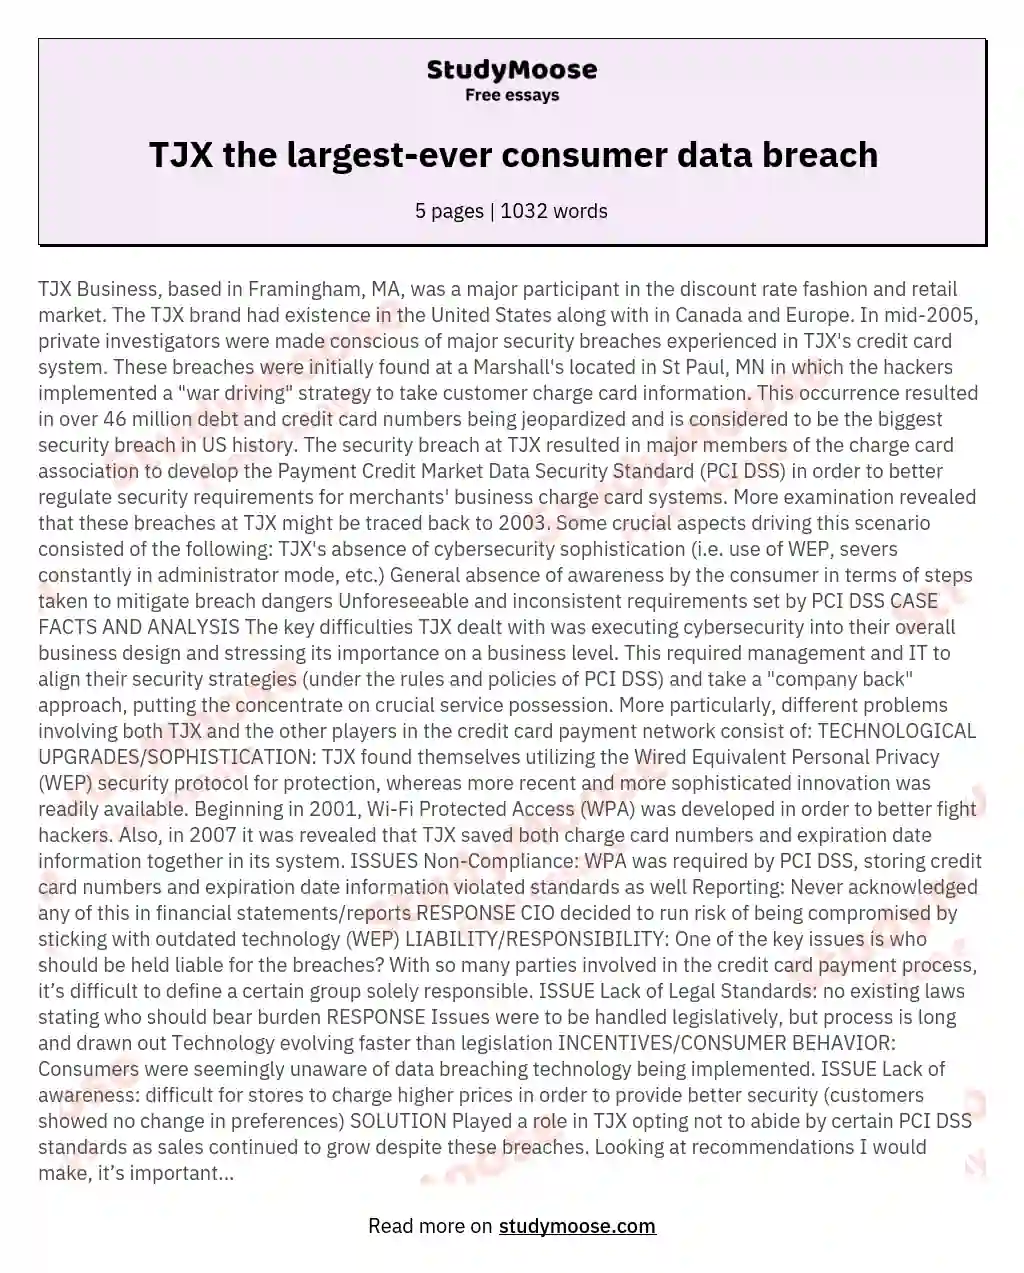 TJX the largest-ever consumer data breach